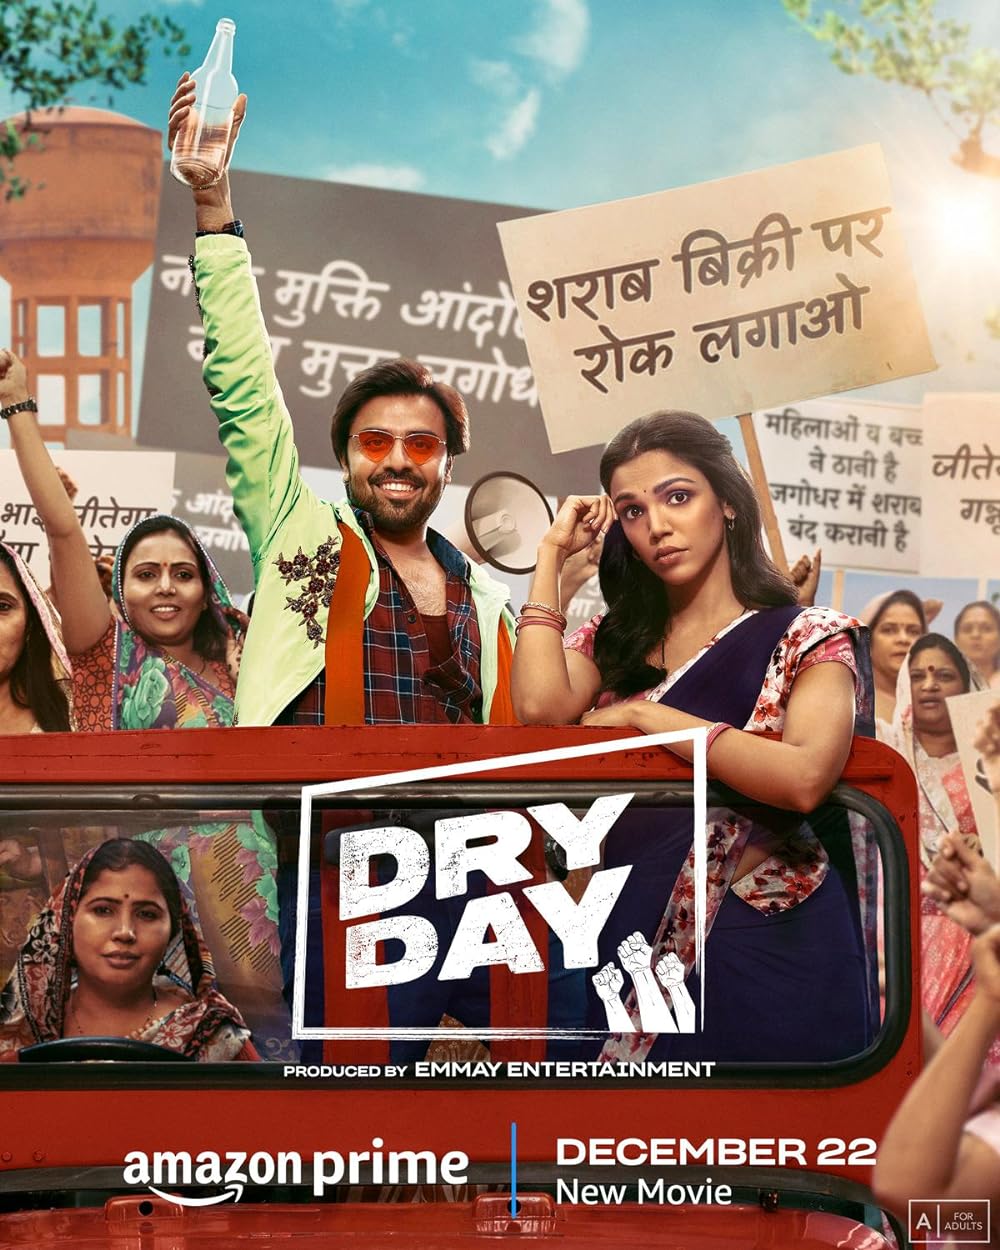 Dry Day (December 22) - Streaming on Prime VideoDry Day delves into Gannu's struggle as a small-time goon battling alcoholism and his journey towards overcoming inner struggles to regain his family's trust and affection.